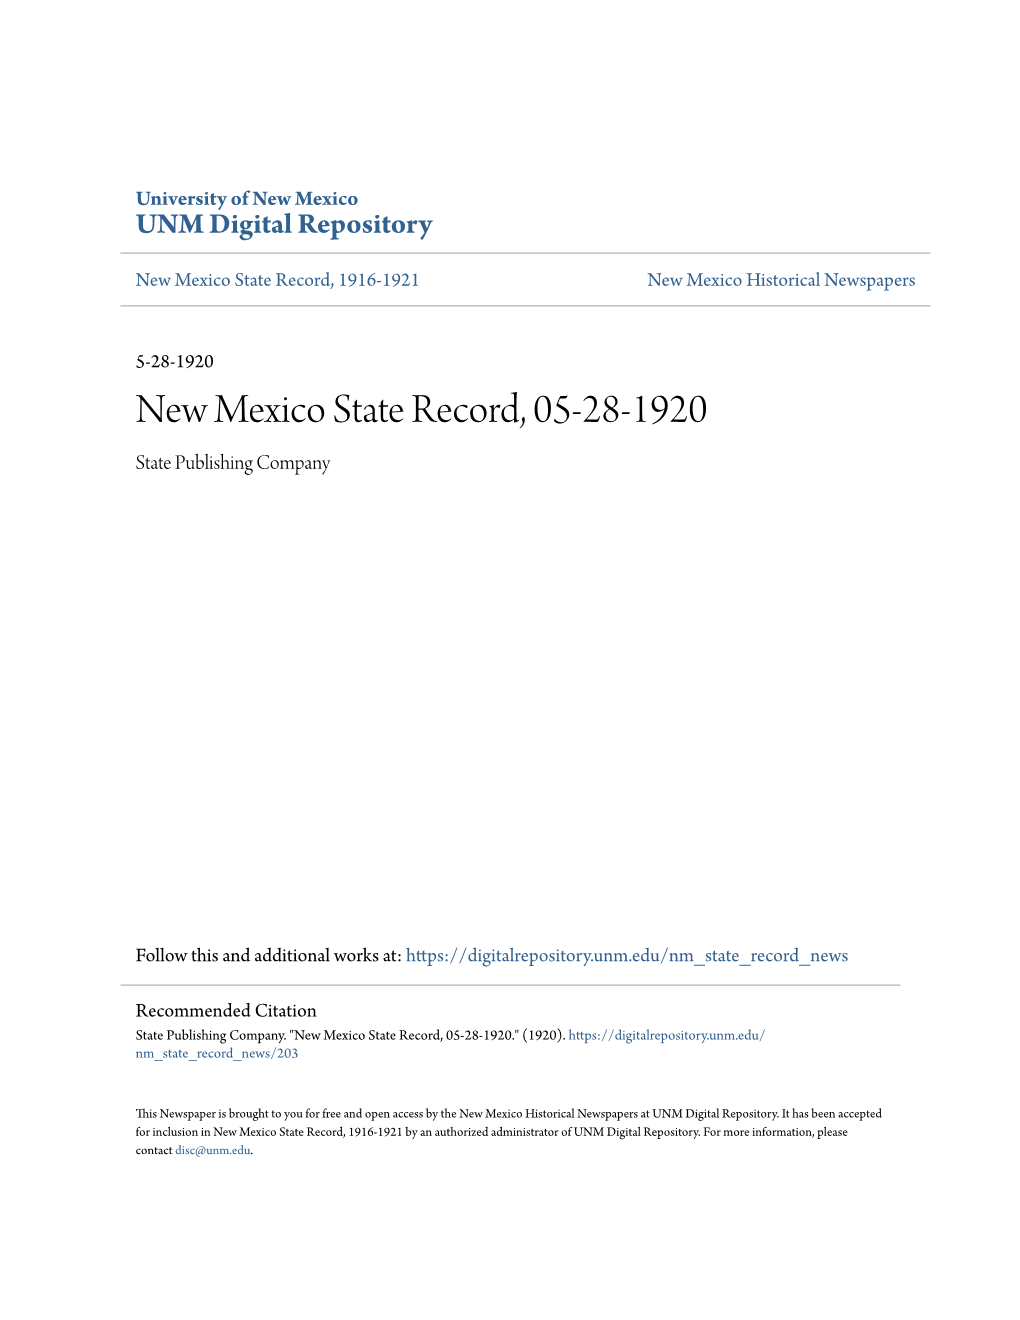 New Mexico State Record, 05-28-1920 State Publishing Company